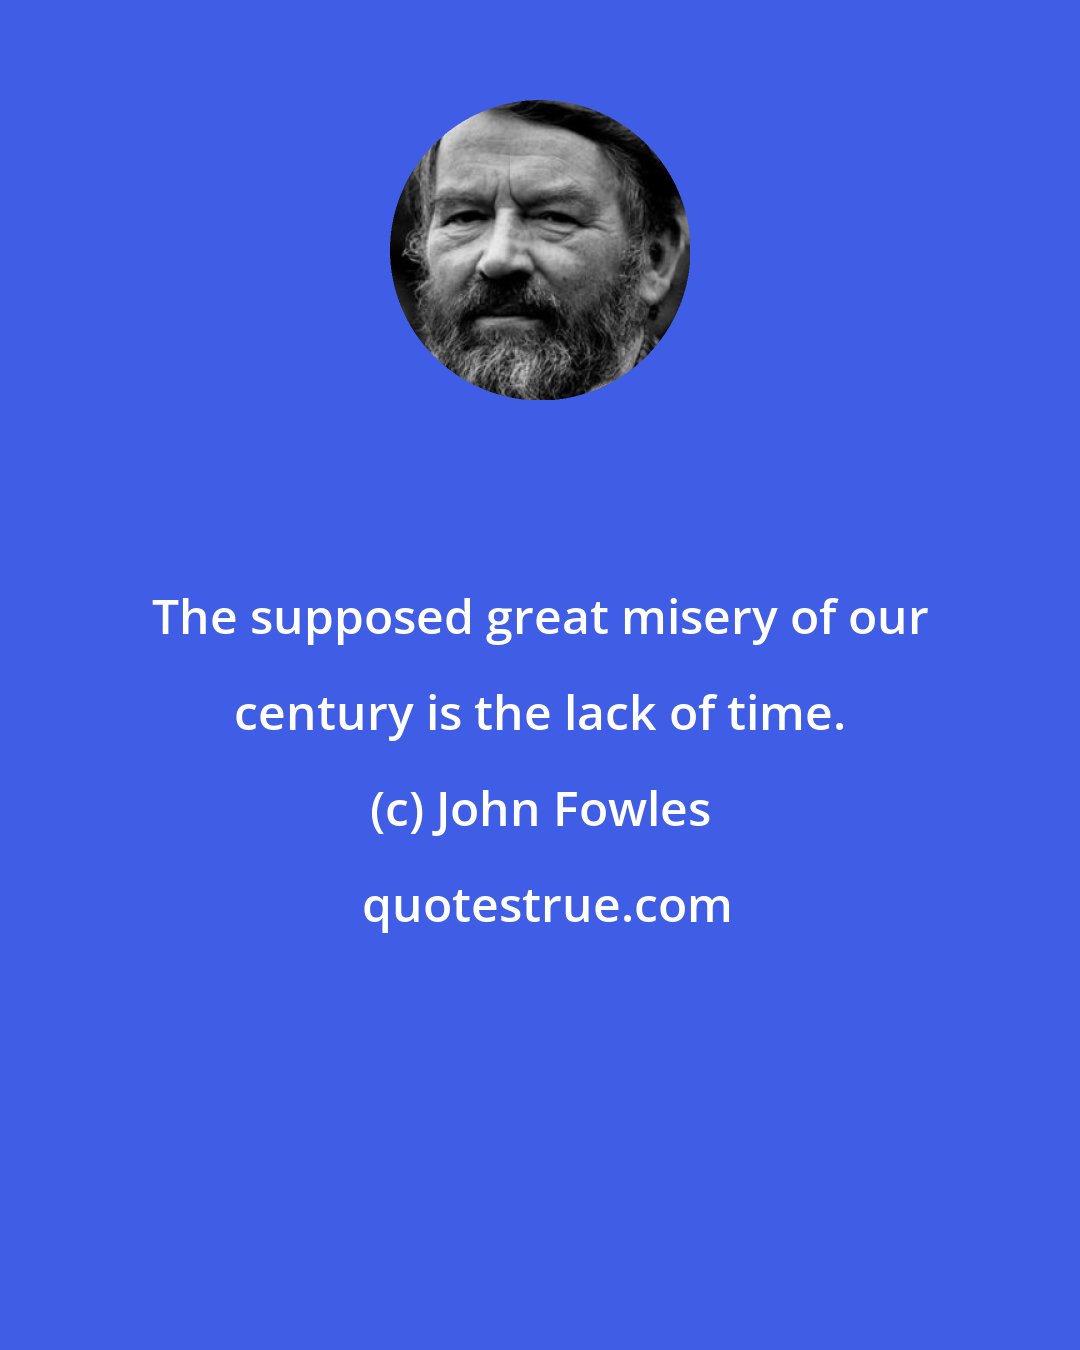 John Fowles: The supposed great misery of our century is the lack of time.